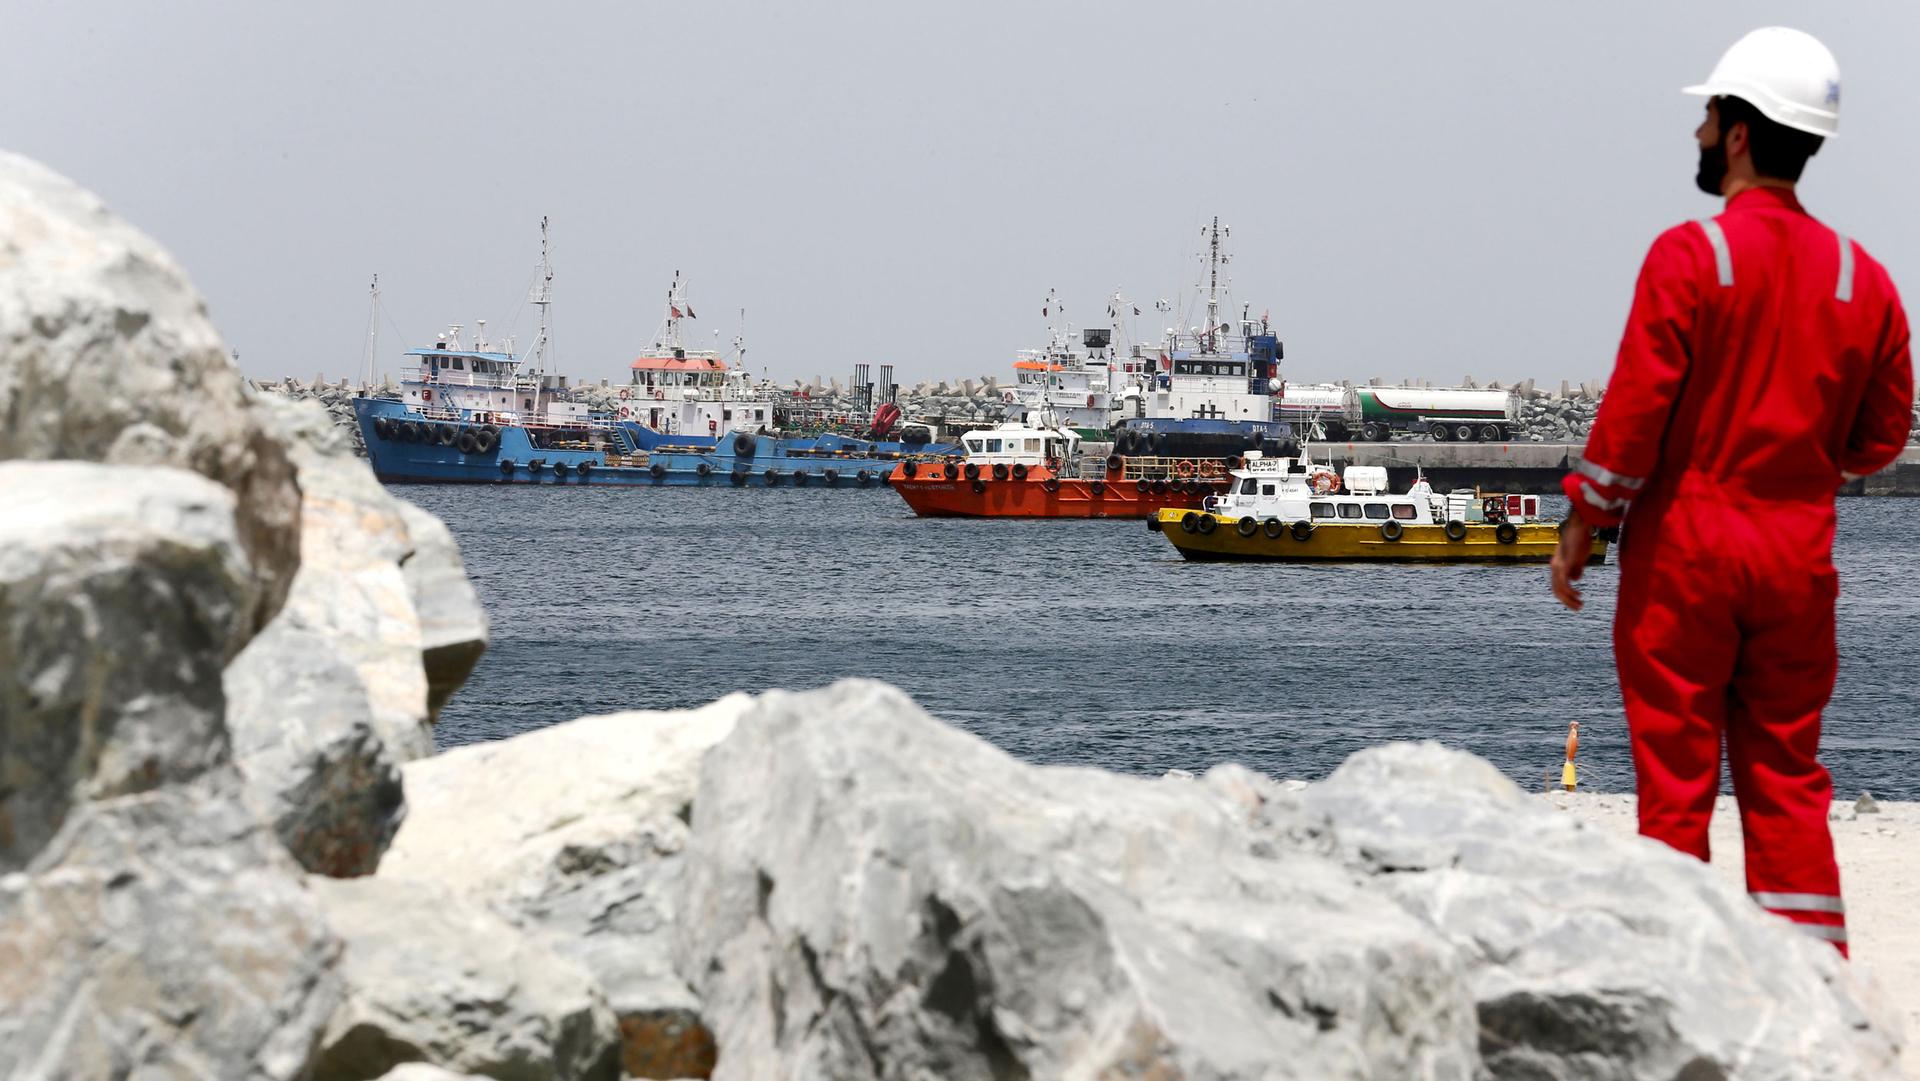 A port technical staff member is shown in the near ground wearing a red jumpsuit with several ships seen in the distance.